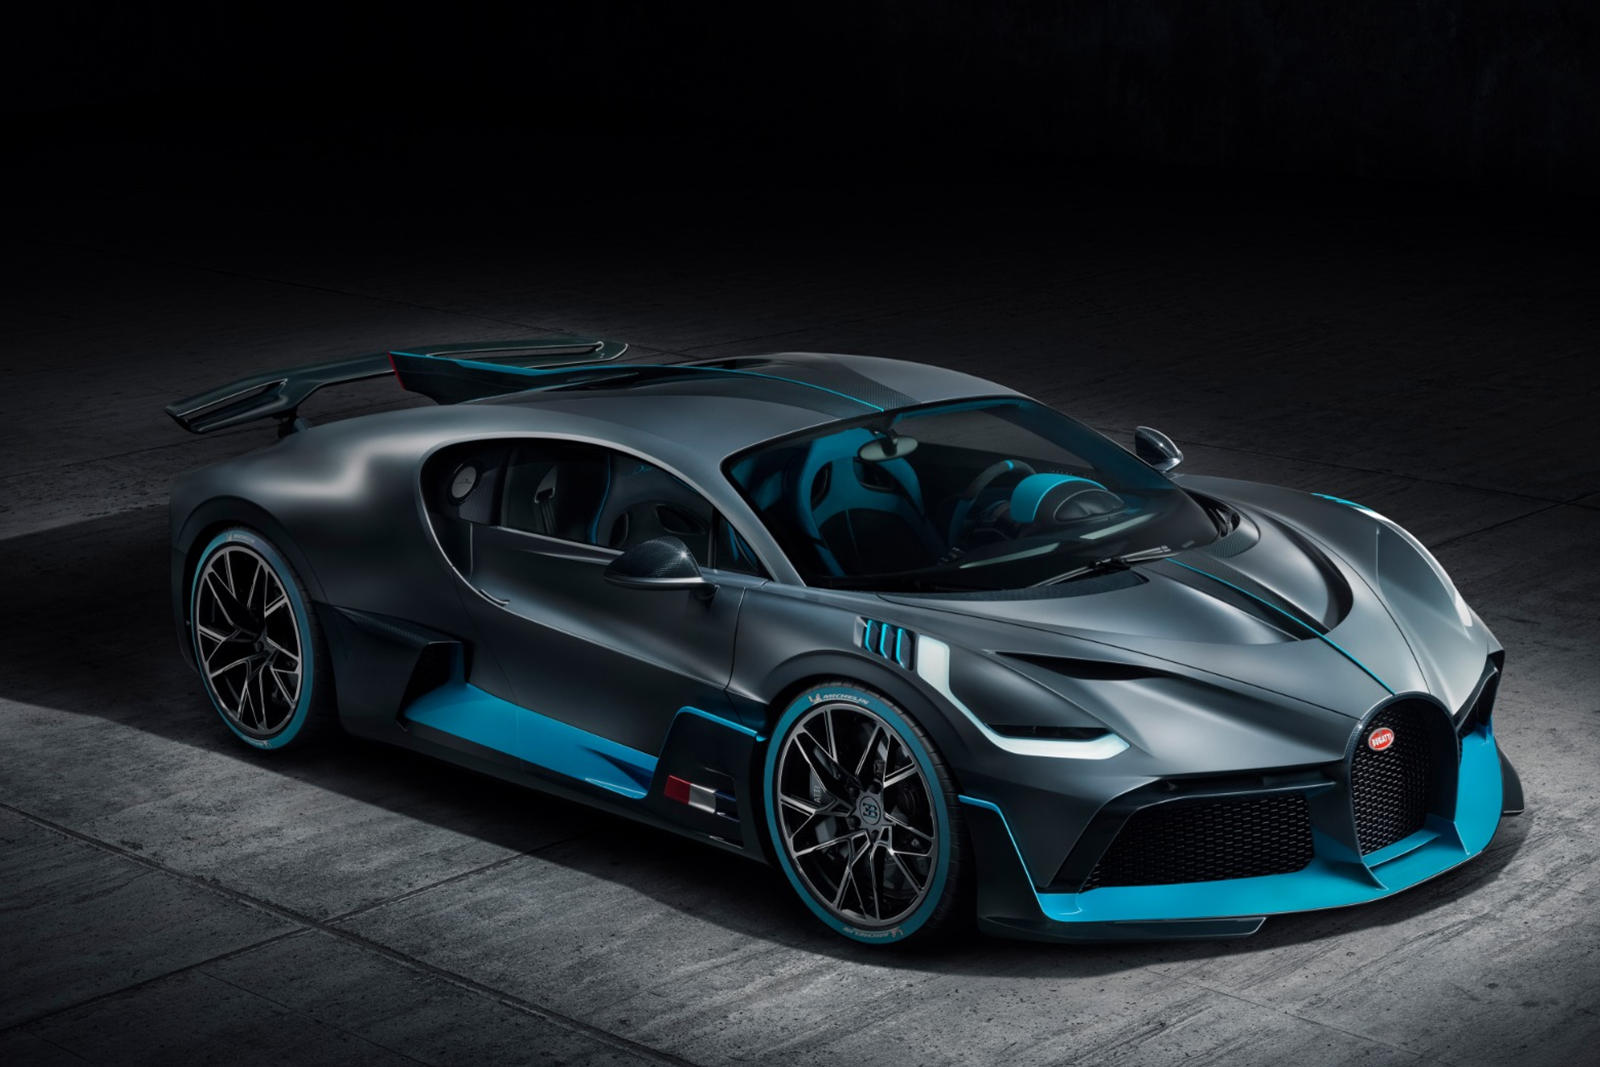 Used Bugatti Divo. Check Divo for sale in USA: prices of every